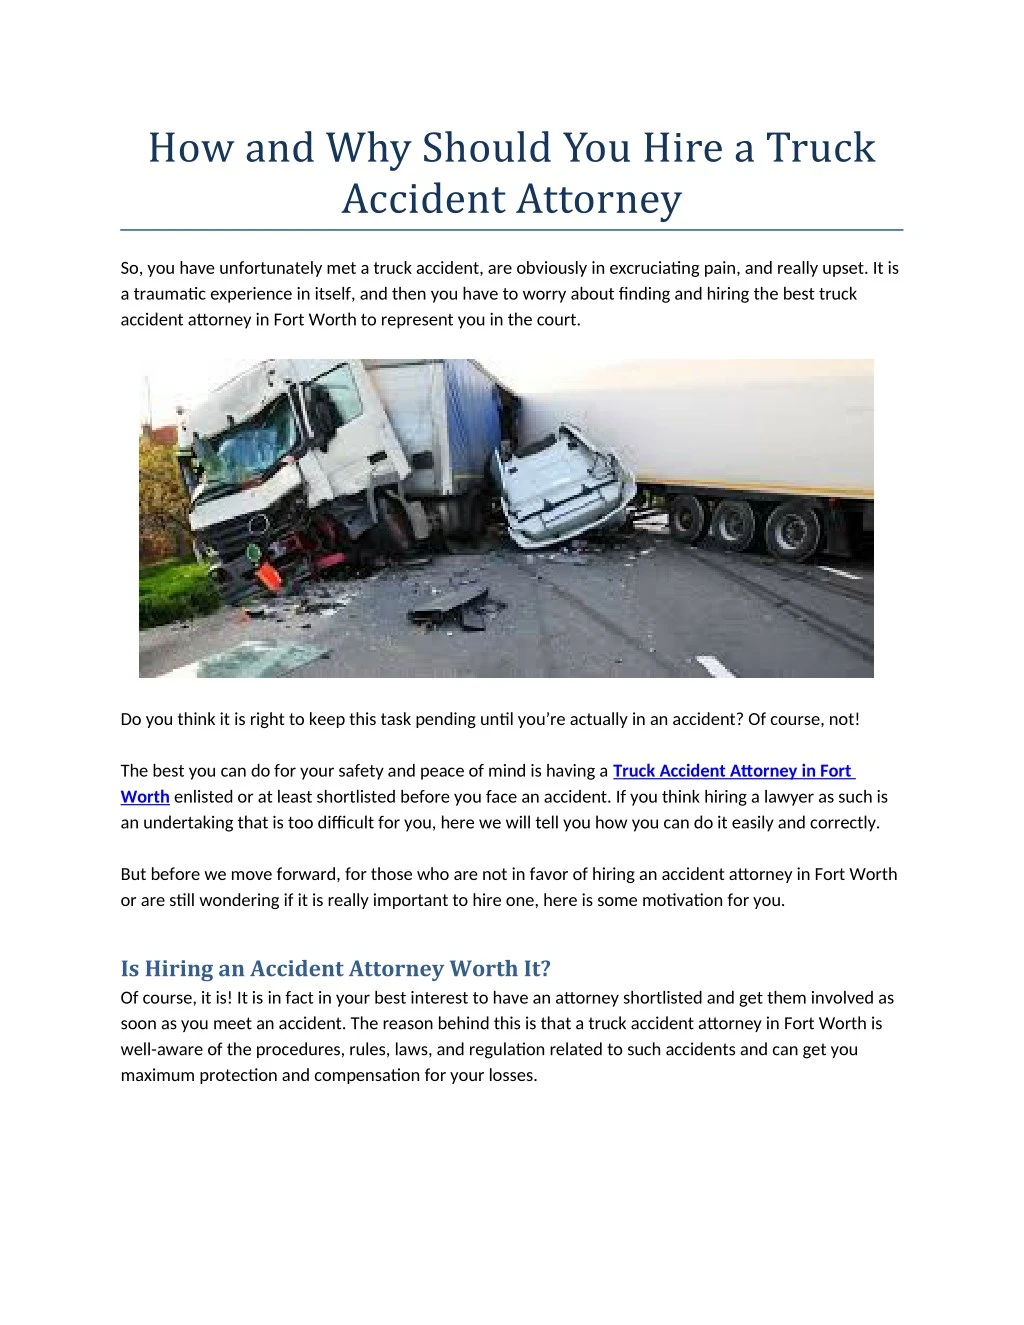 how and why should you hire a truck accident